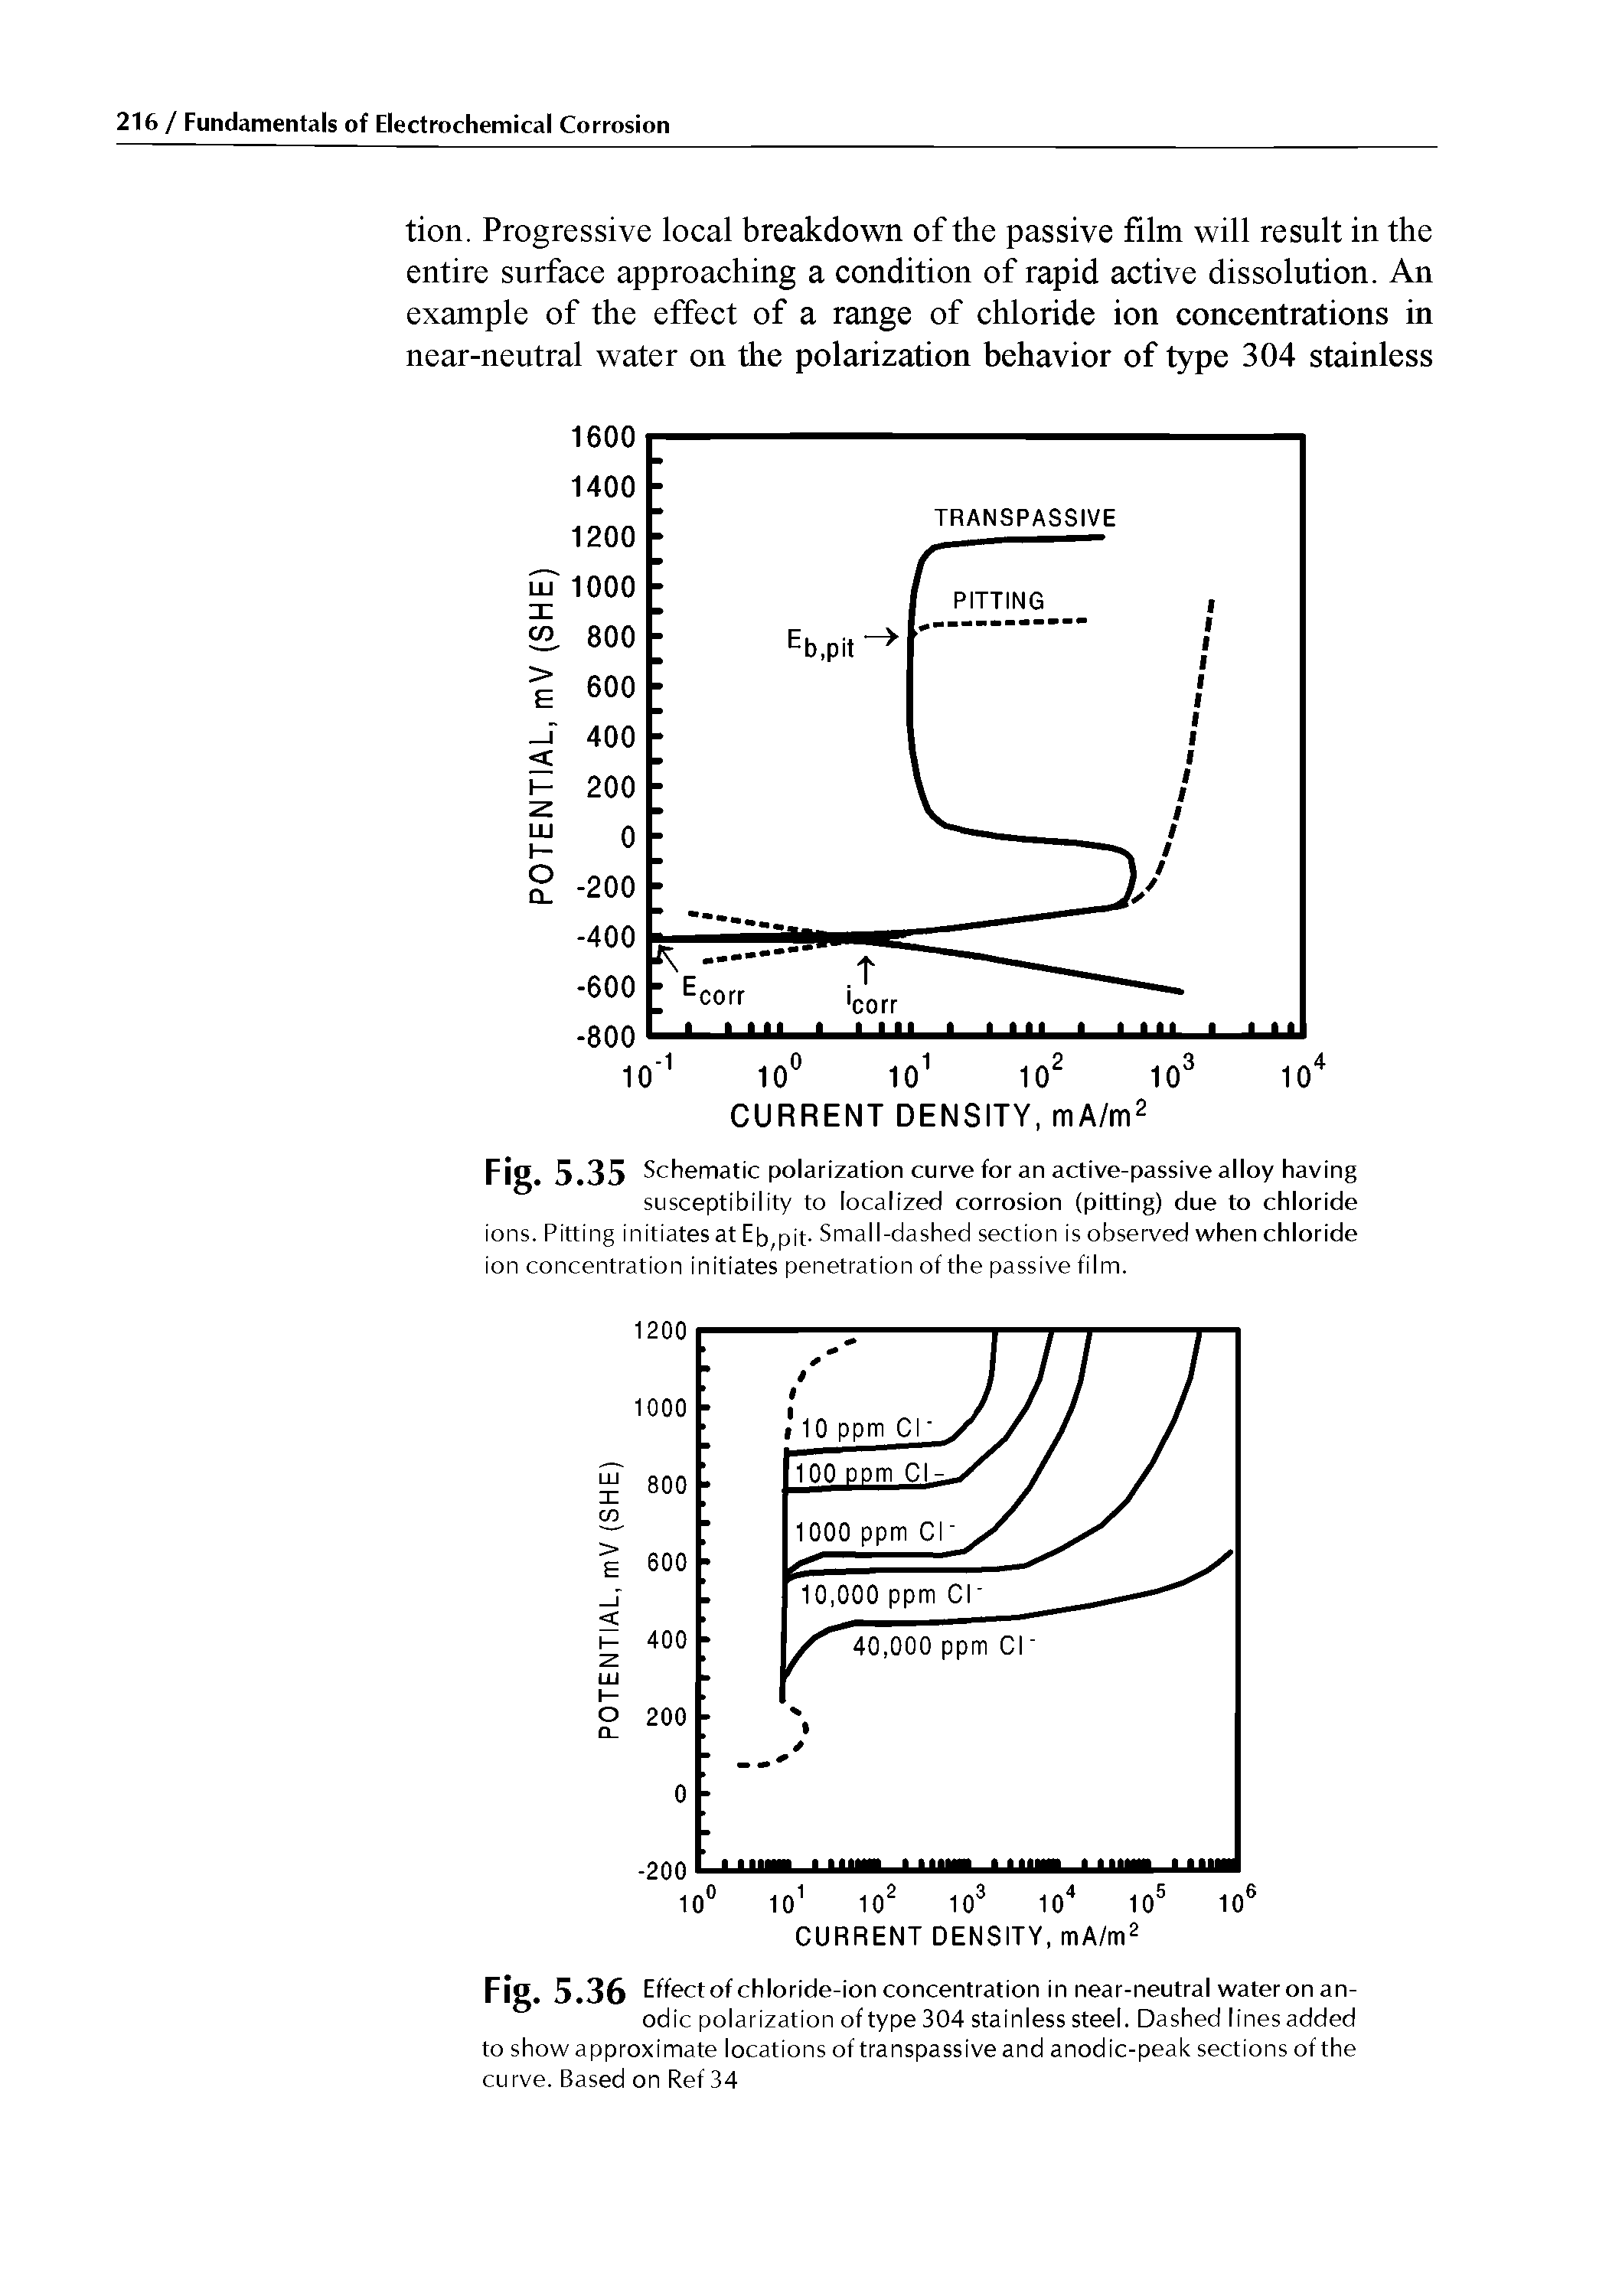 Fig. 5.35 Schematic polarization curve for an active-passive alloy having susceptibility to localized corrosion (pitting) due to chloride ions. Pitting initiates at Eb,pit- Small-dashed section is observed when chloride ion concentration initiates penetration of the passive film.